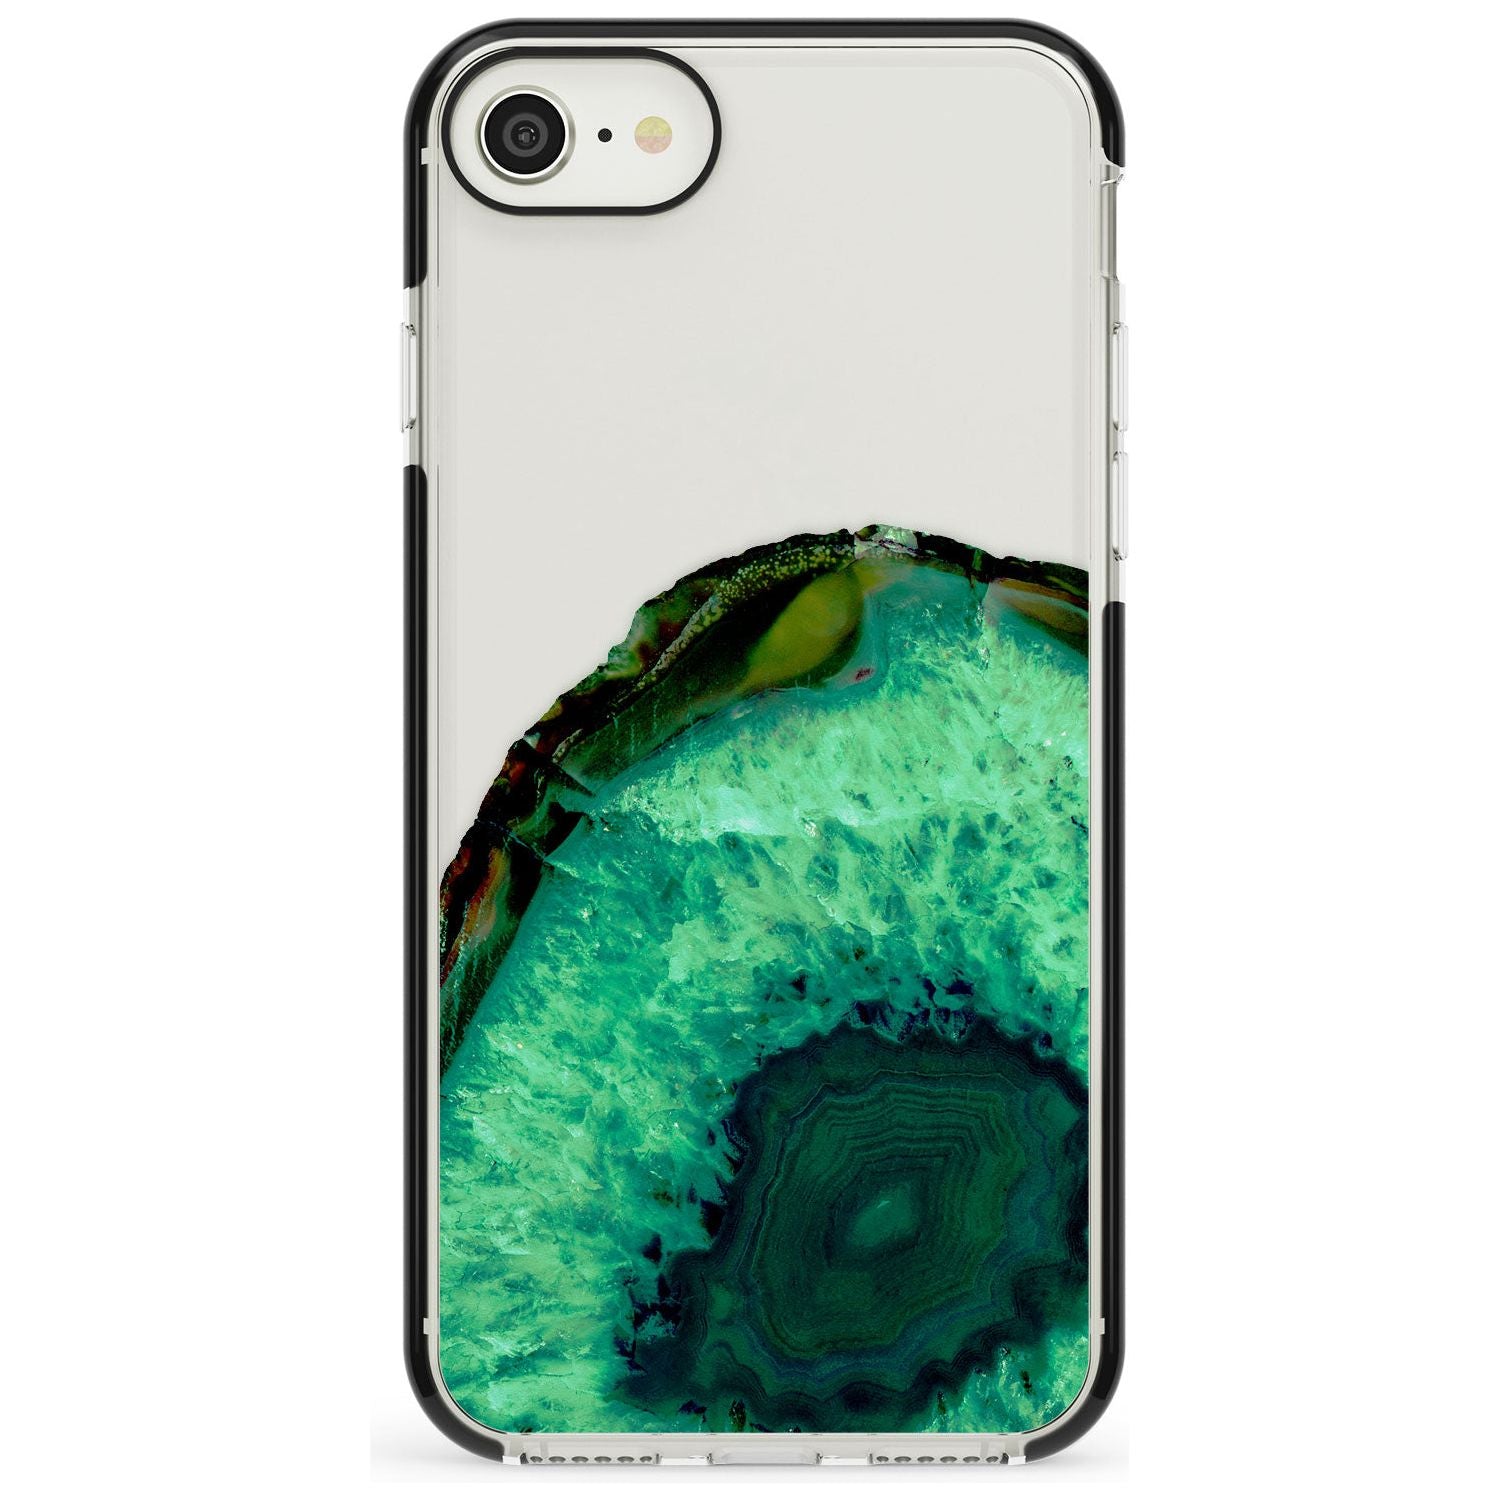 Emerald Green Gemstone Crystal Clear Design Black Impact Phone Case for iPhone SE 8 7 Plus